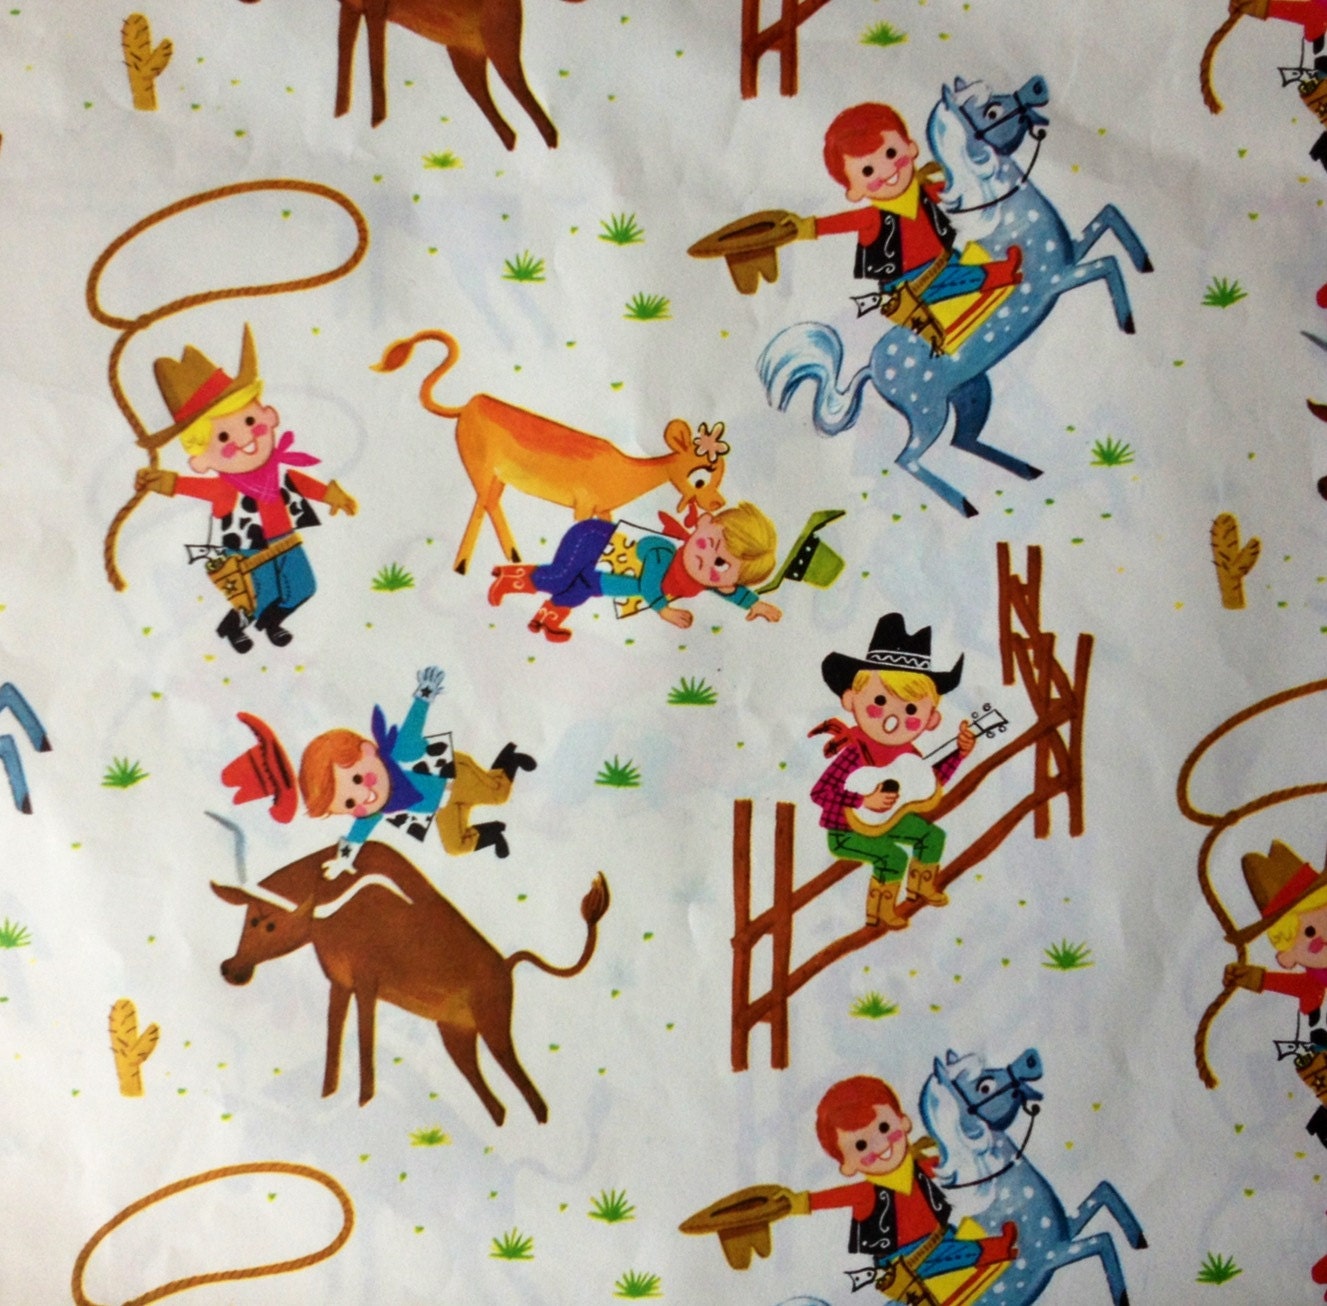 Ropin' Ridin' Cowboy Kids Vintage Wrapping paper gift